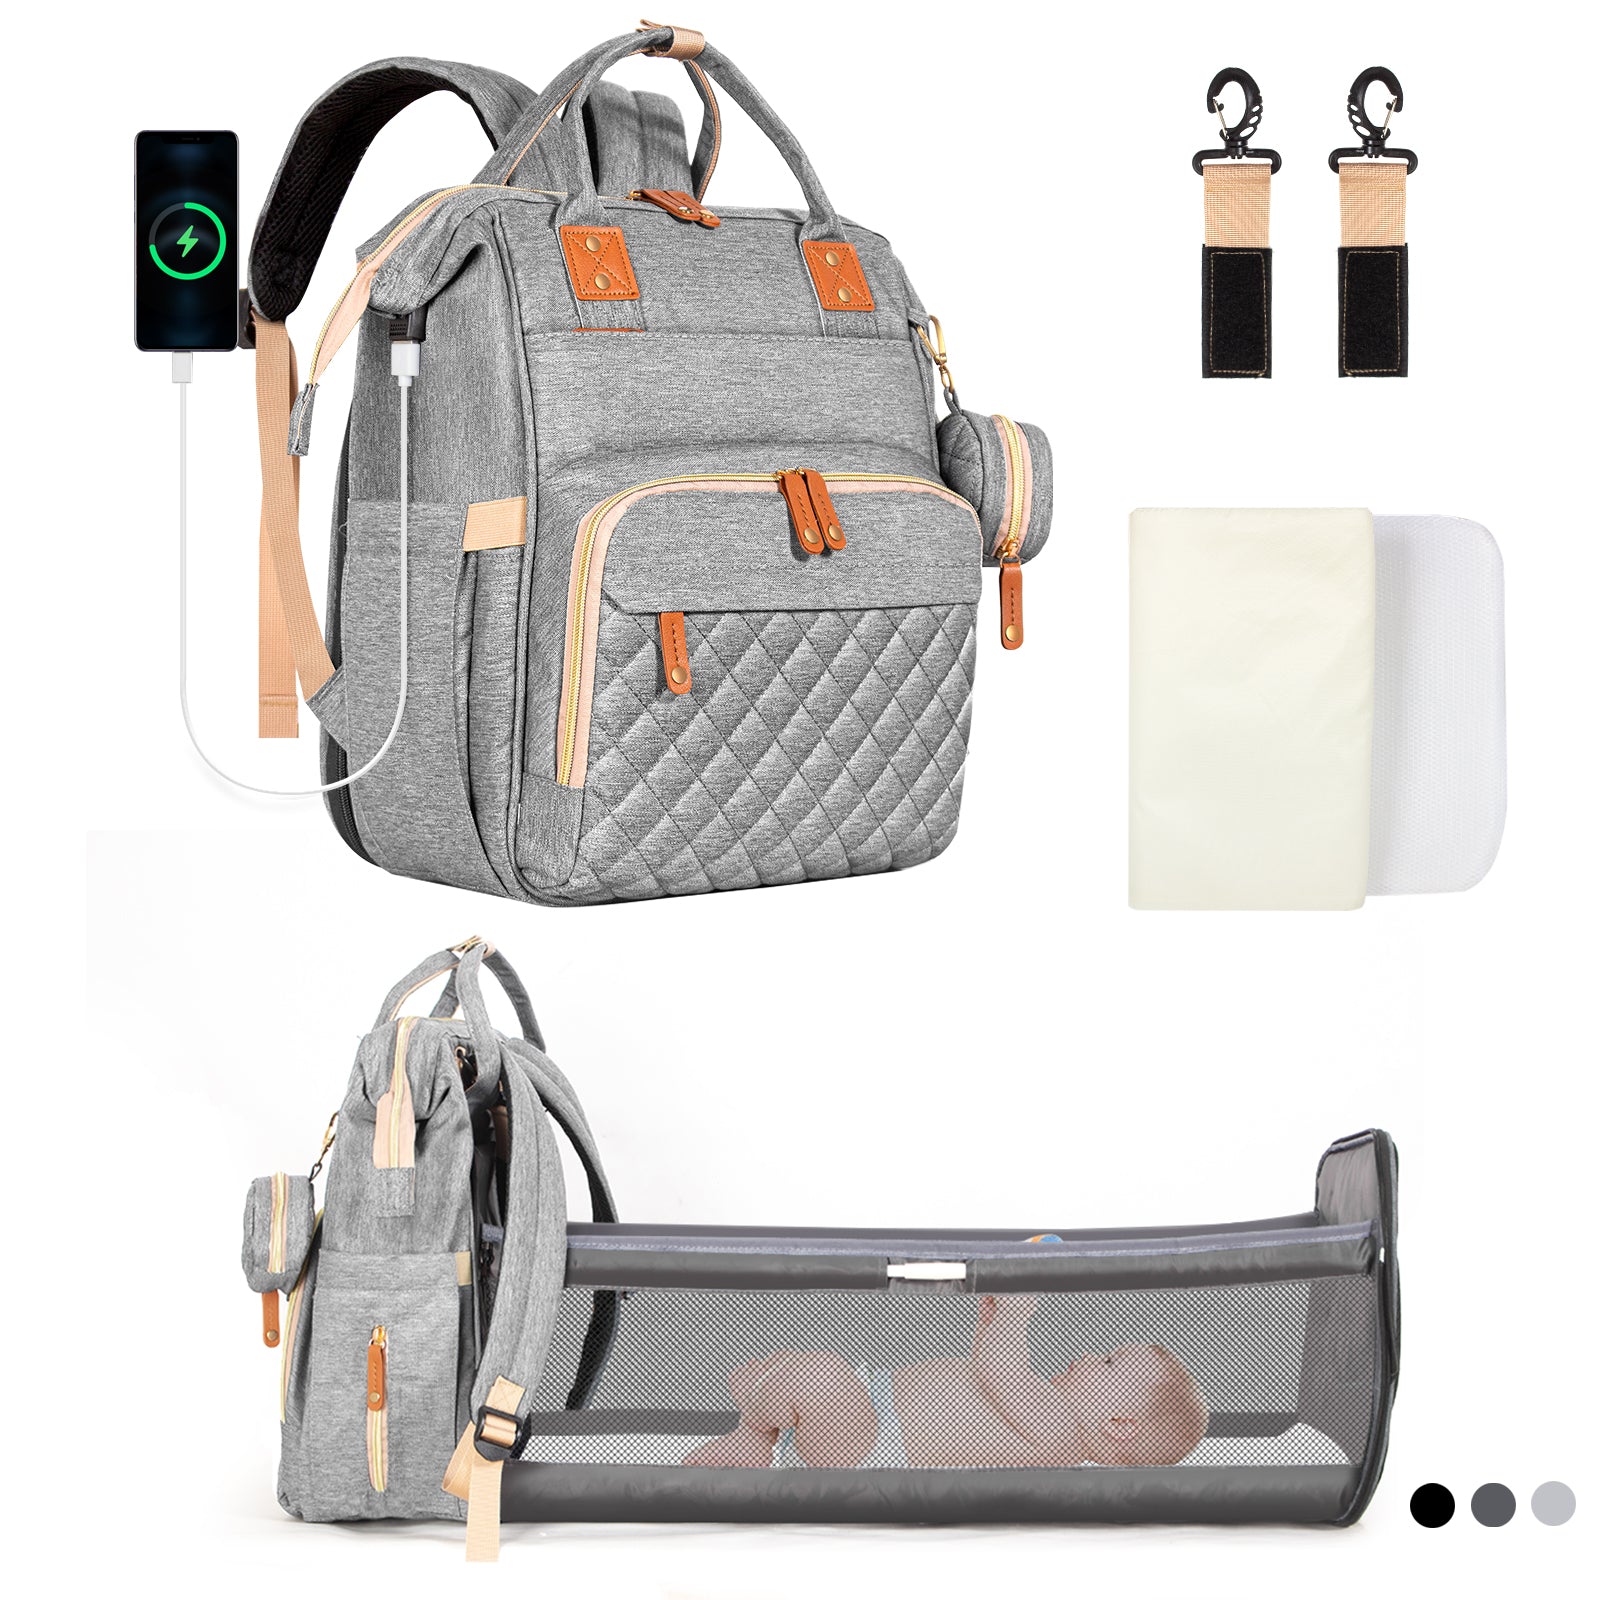 Diaper-Backpack-with-Foldable-Baby-Bed-Large-Capacity-Waterproof-Portable-Multifunction-Diaper-Bag-with-Mat-Pacifier-Holder-and-USB-Port-Light-Grey-Diaper-Backpack-with-Foldable-Baby-Bed-Light-Gray